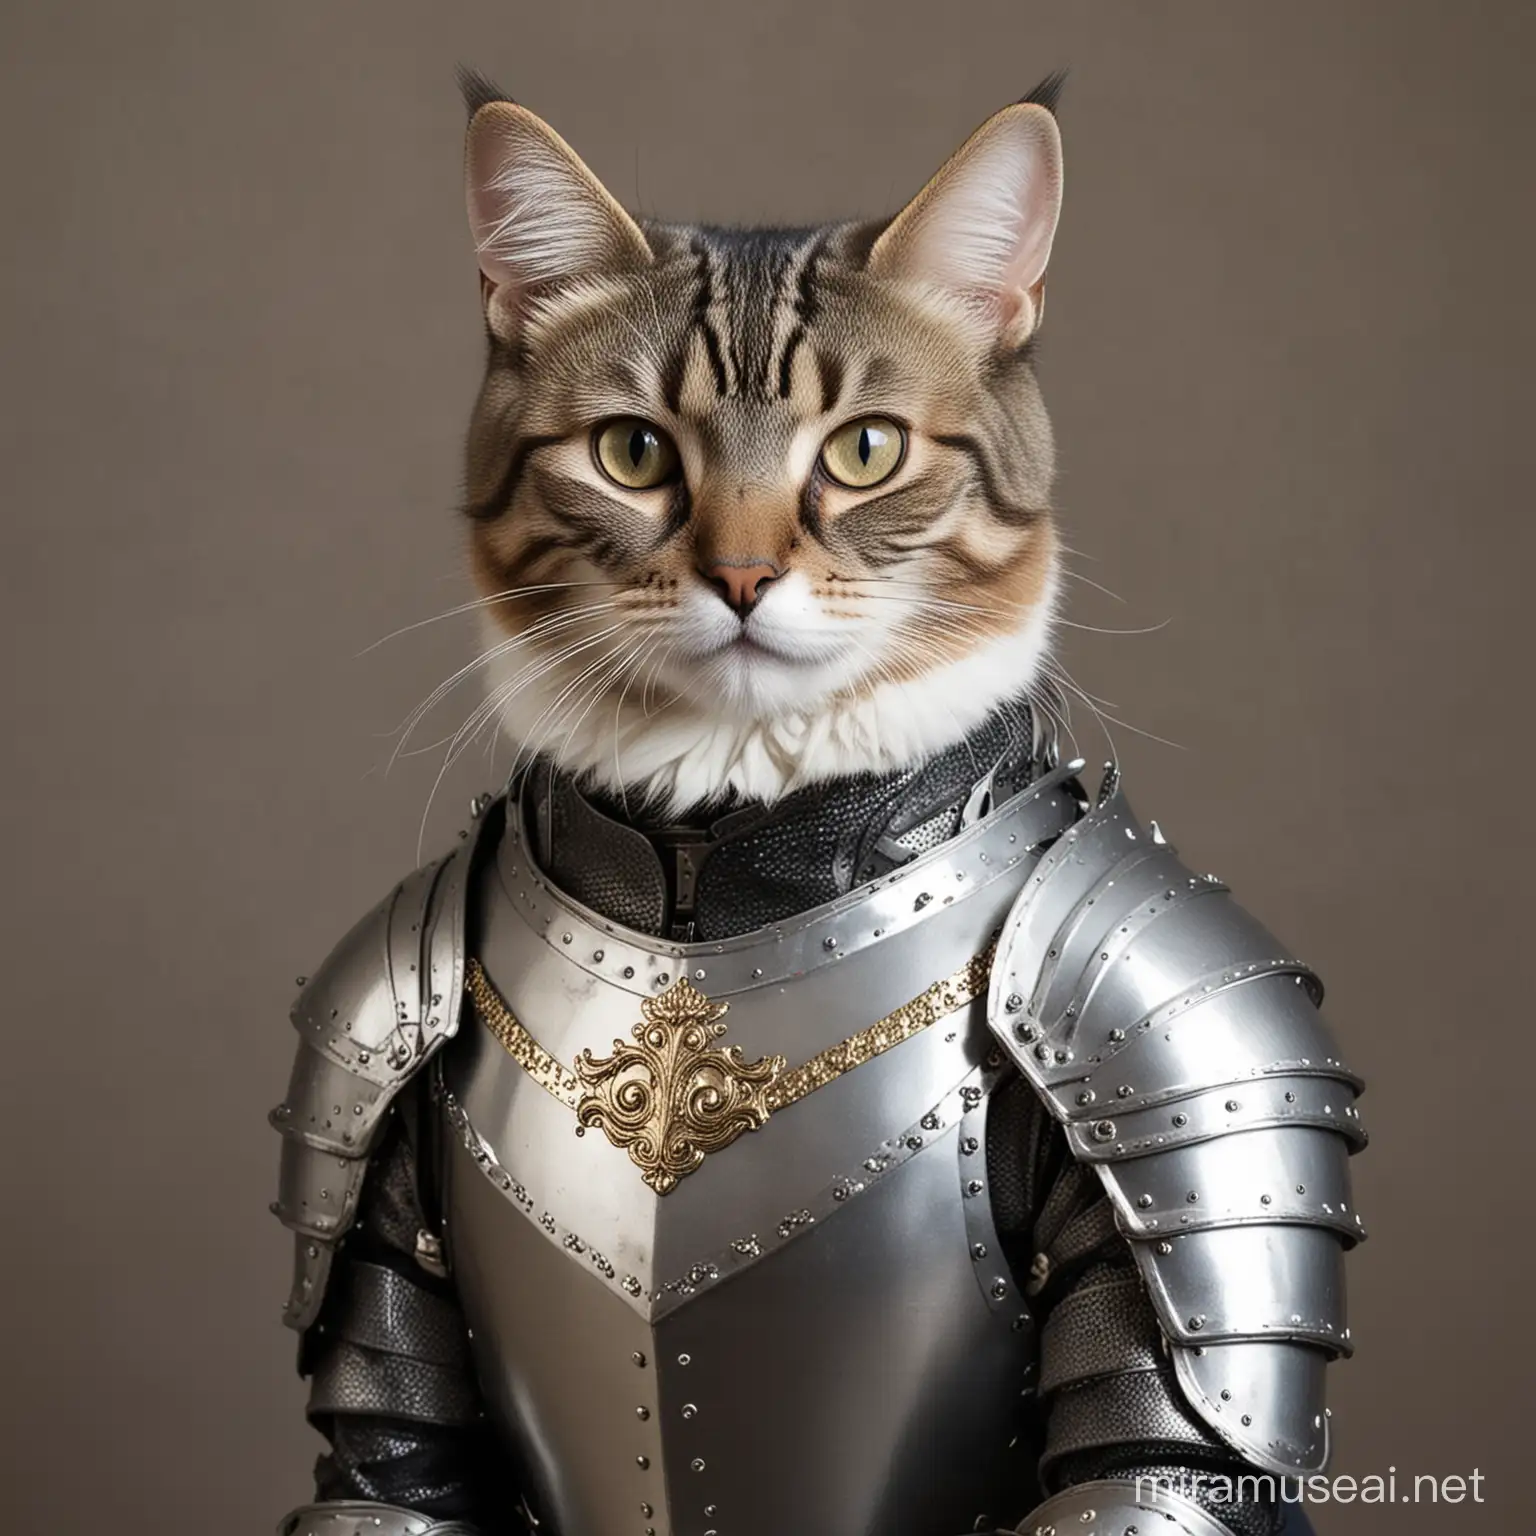 cat in a suit of armor

